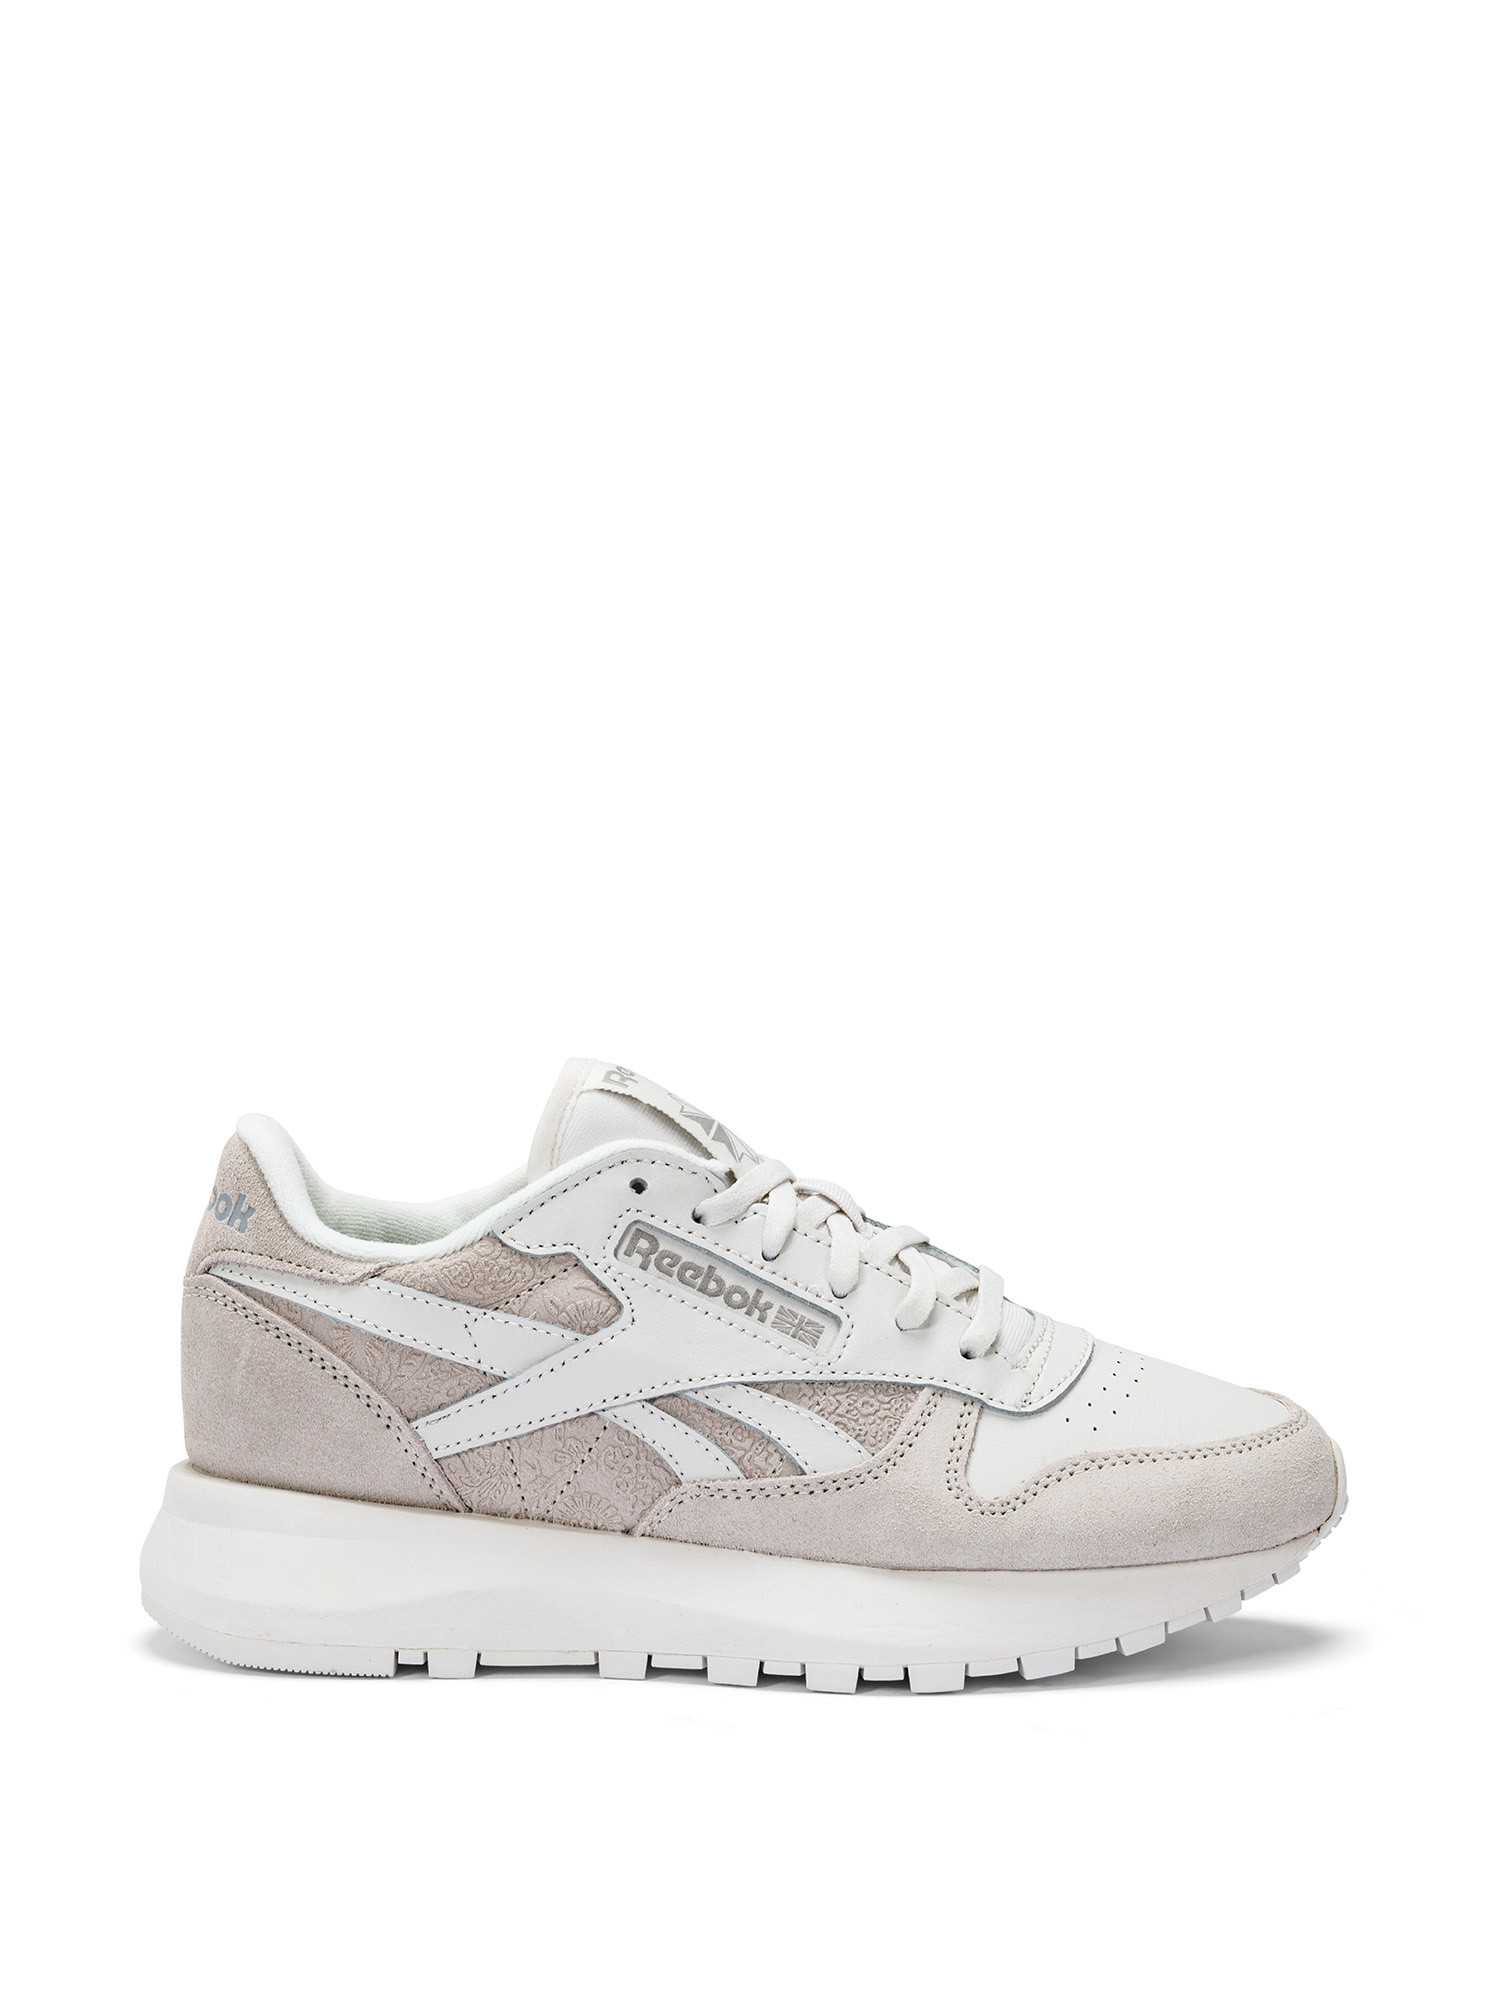 Reebok - Classic Leather SP Shoes, Grey, large image number 0